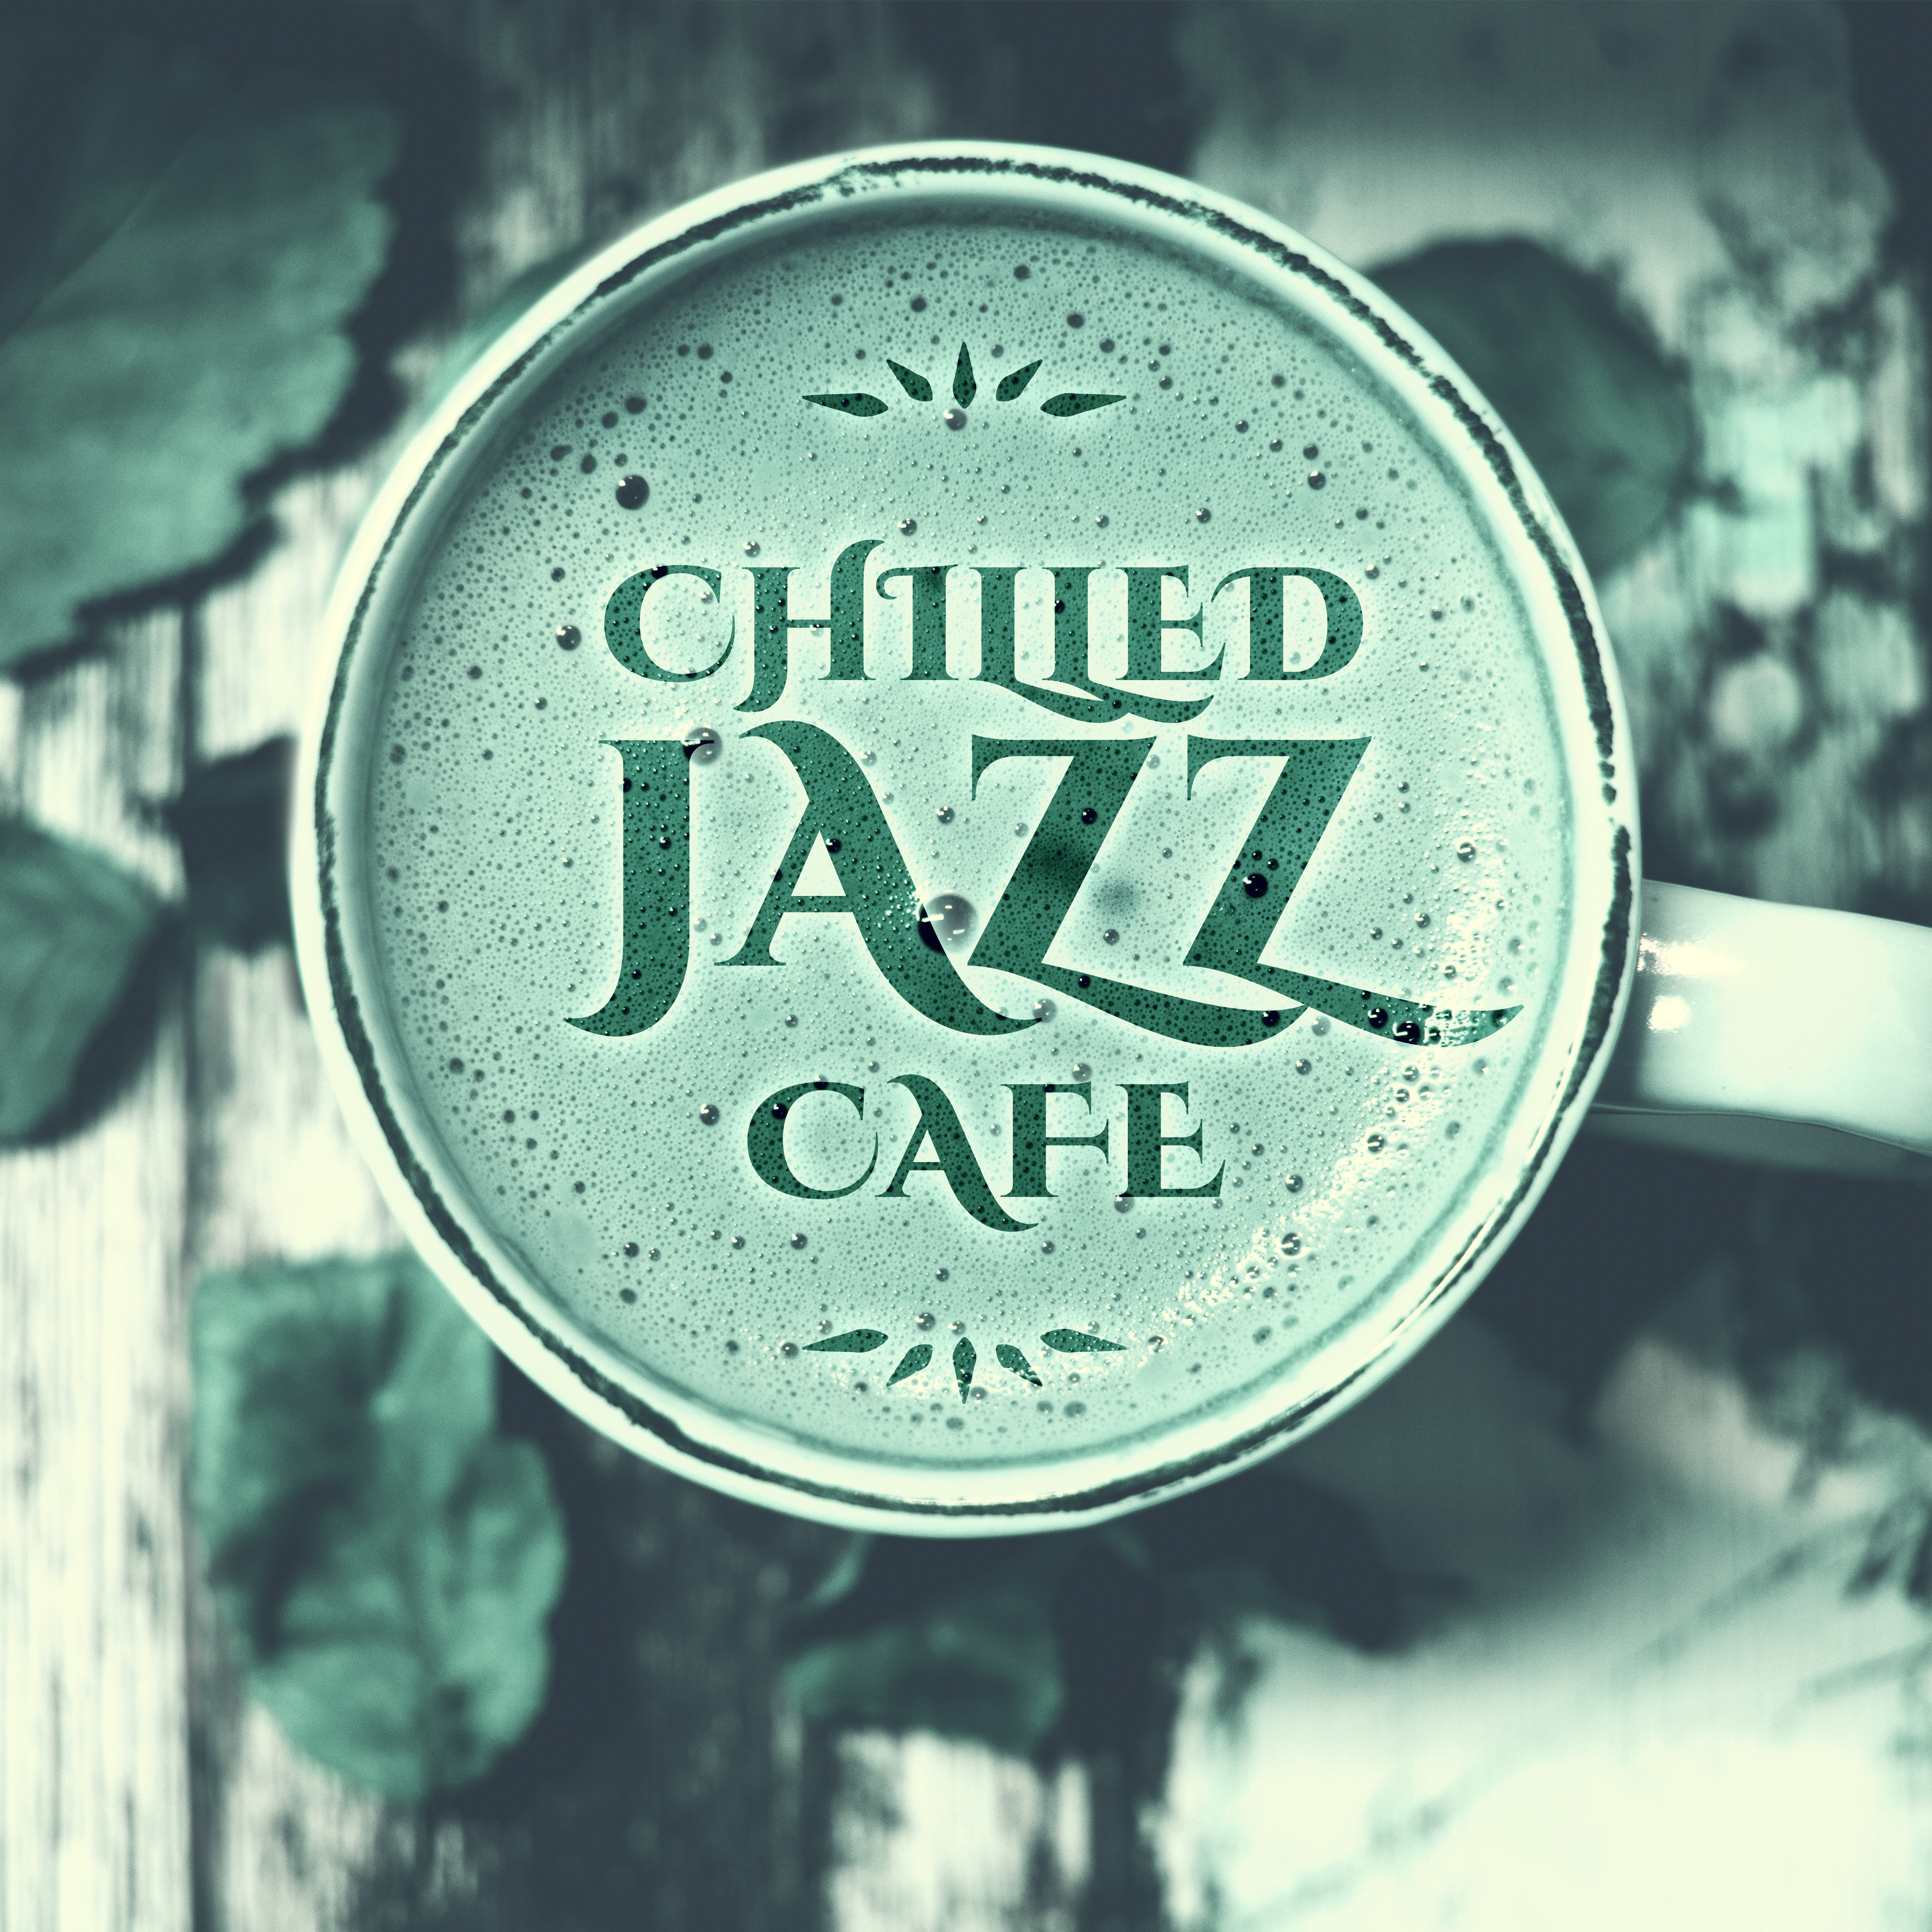 Chilled Jazz Cafe – Cafe Lounge, Instrumental Piano, Mellow Jazz, Ambient Lounge, Peaceful Sounds of Jazz